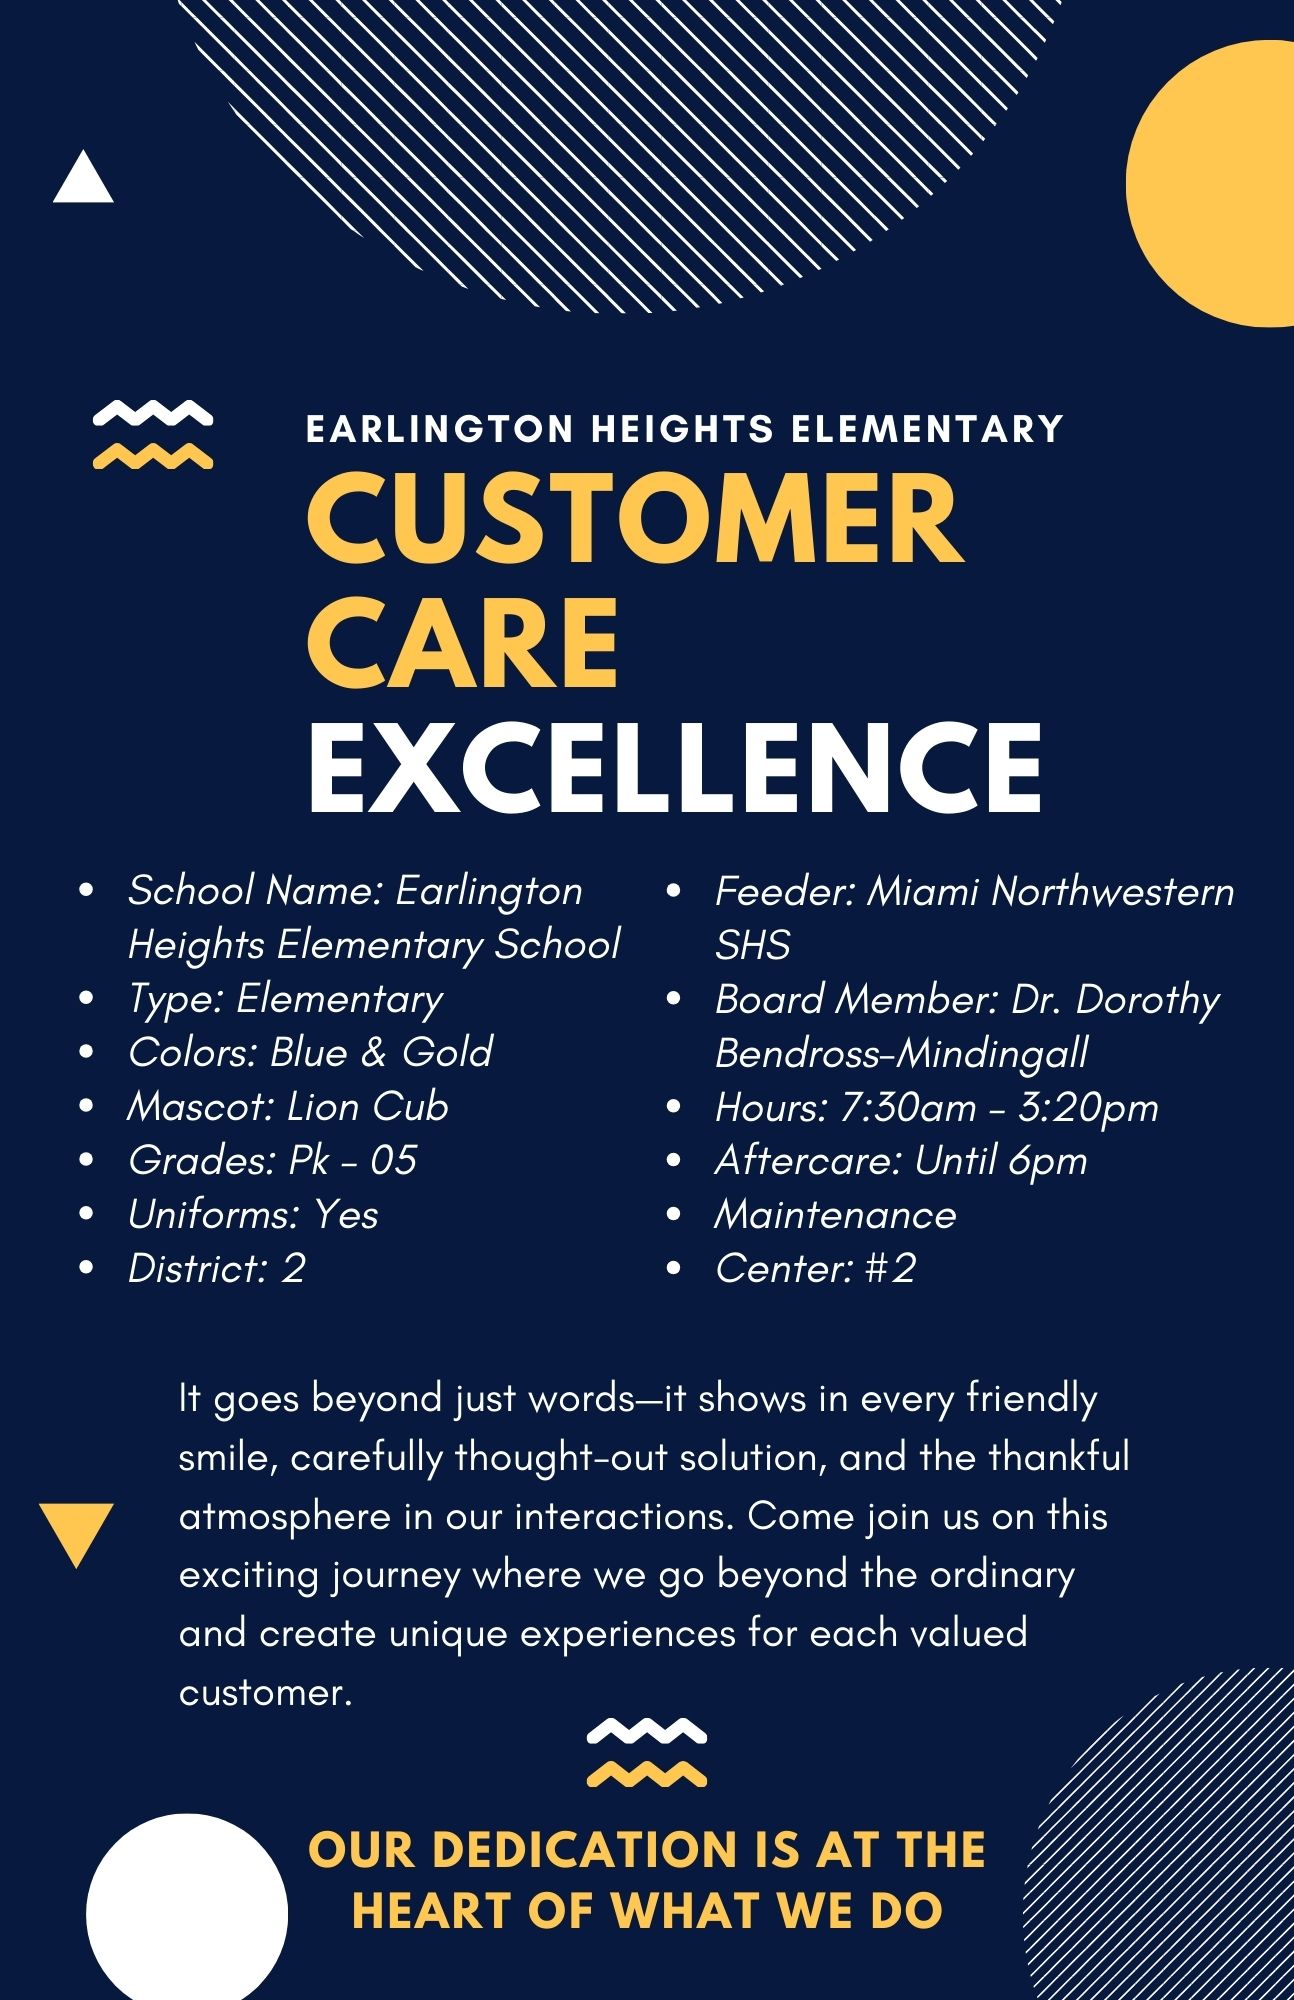 Earlington Heights Elementary School | Magnet School in Miami Florida | Customer Care Excellence